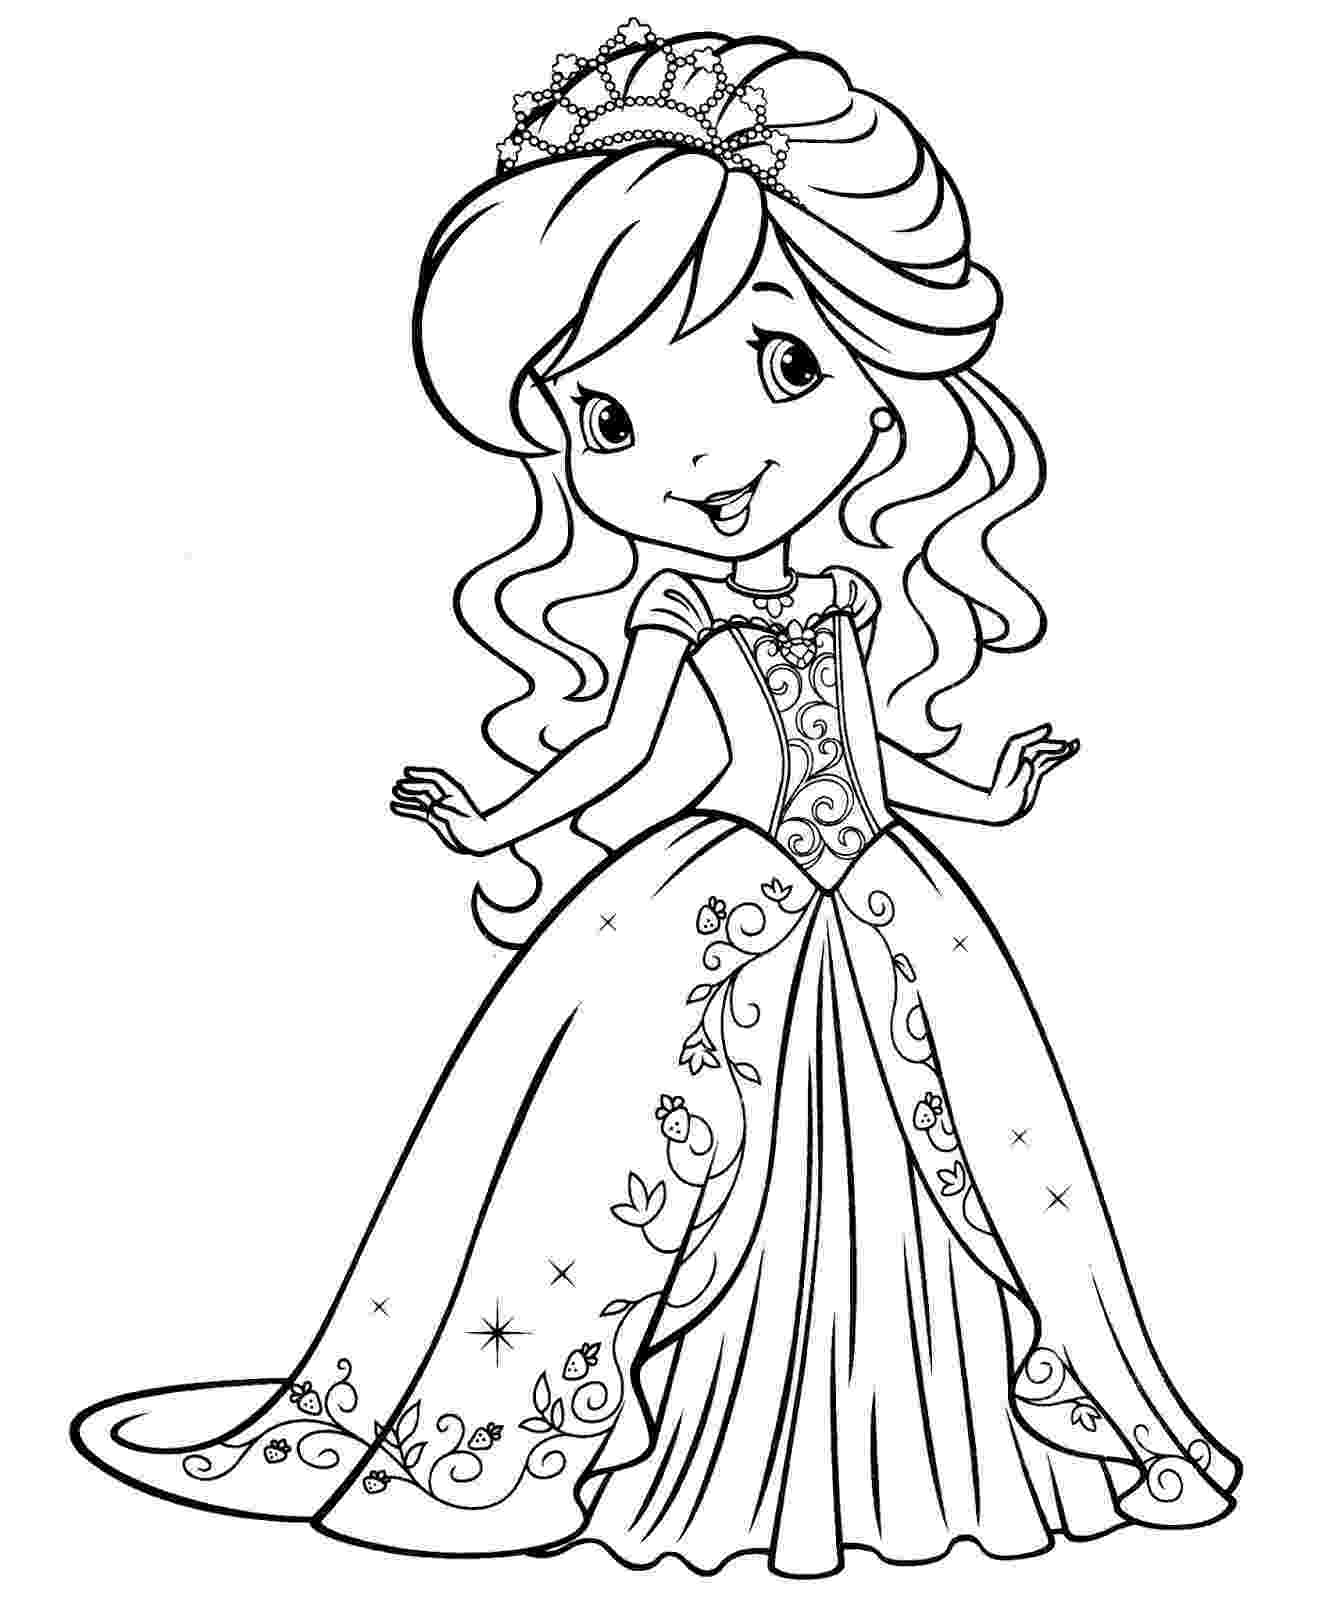 girl colouring pages beautiful cute girl coloring page wecoloringpagecom colouring pages girl 